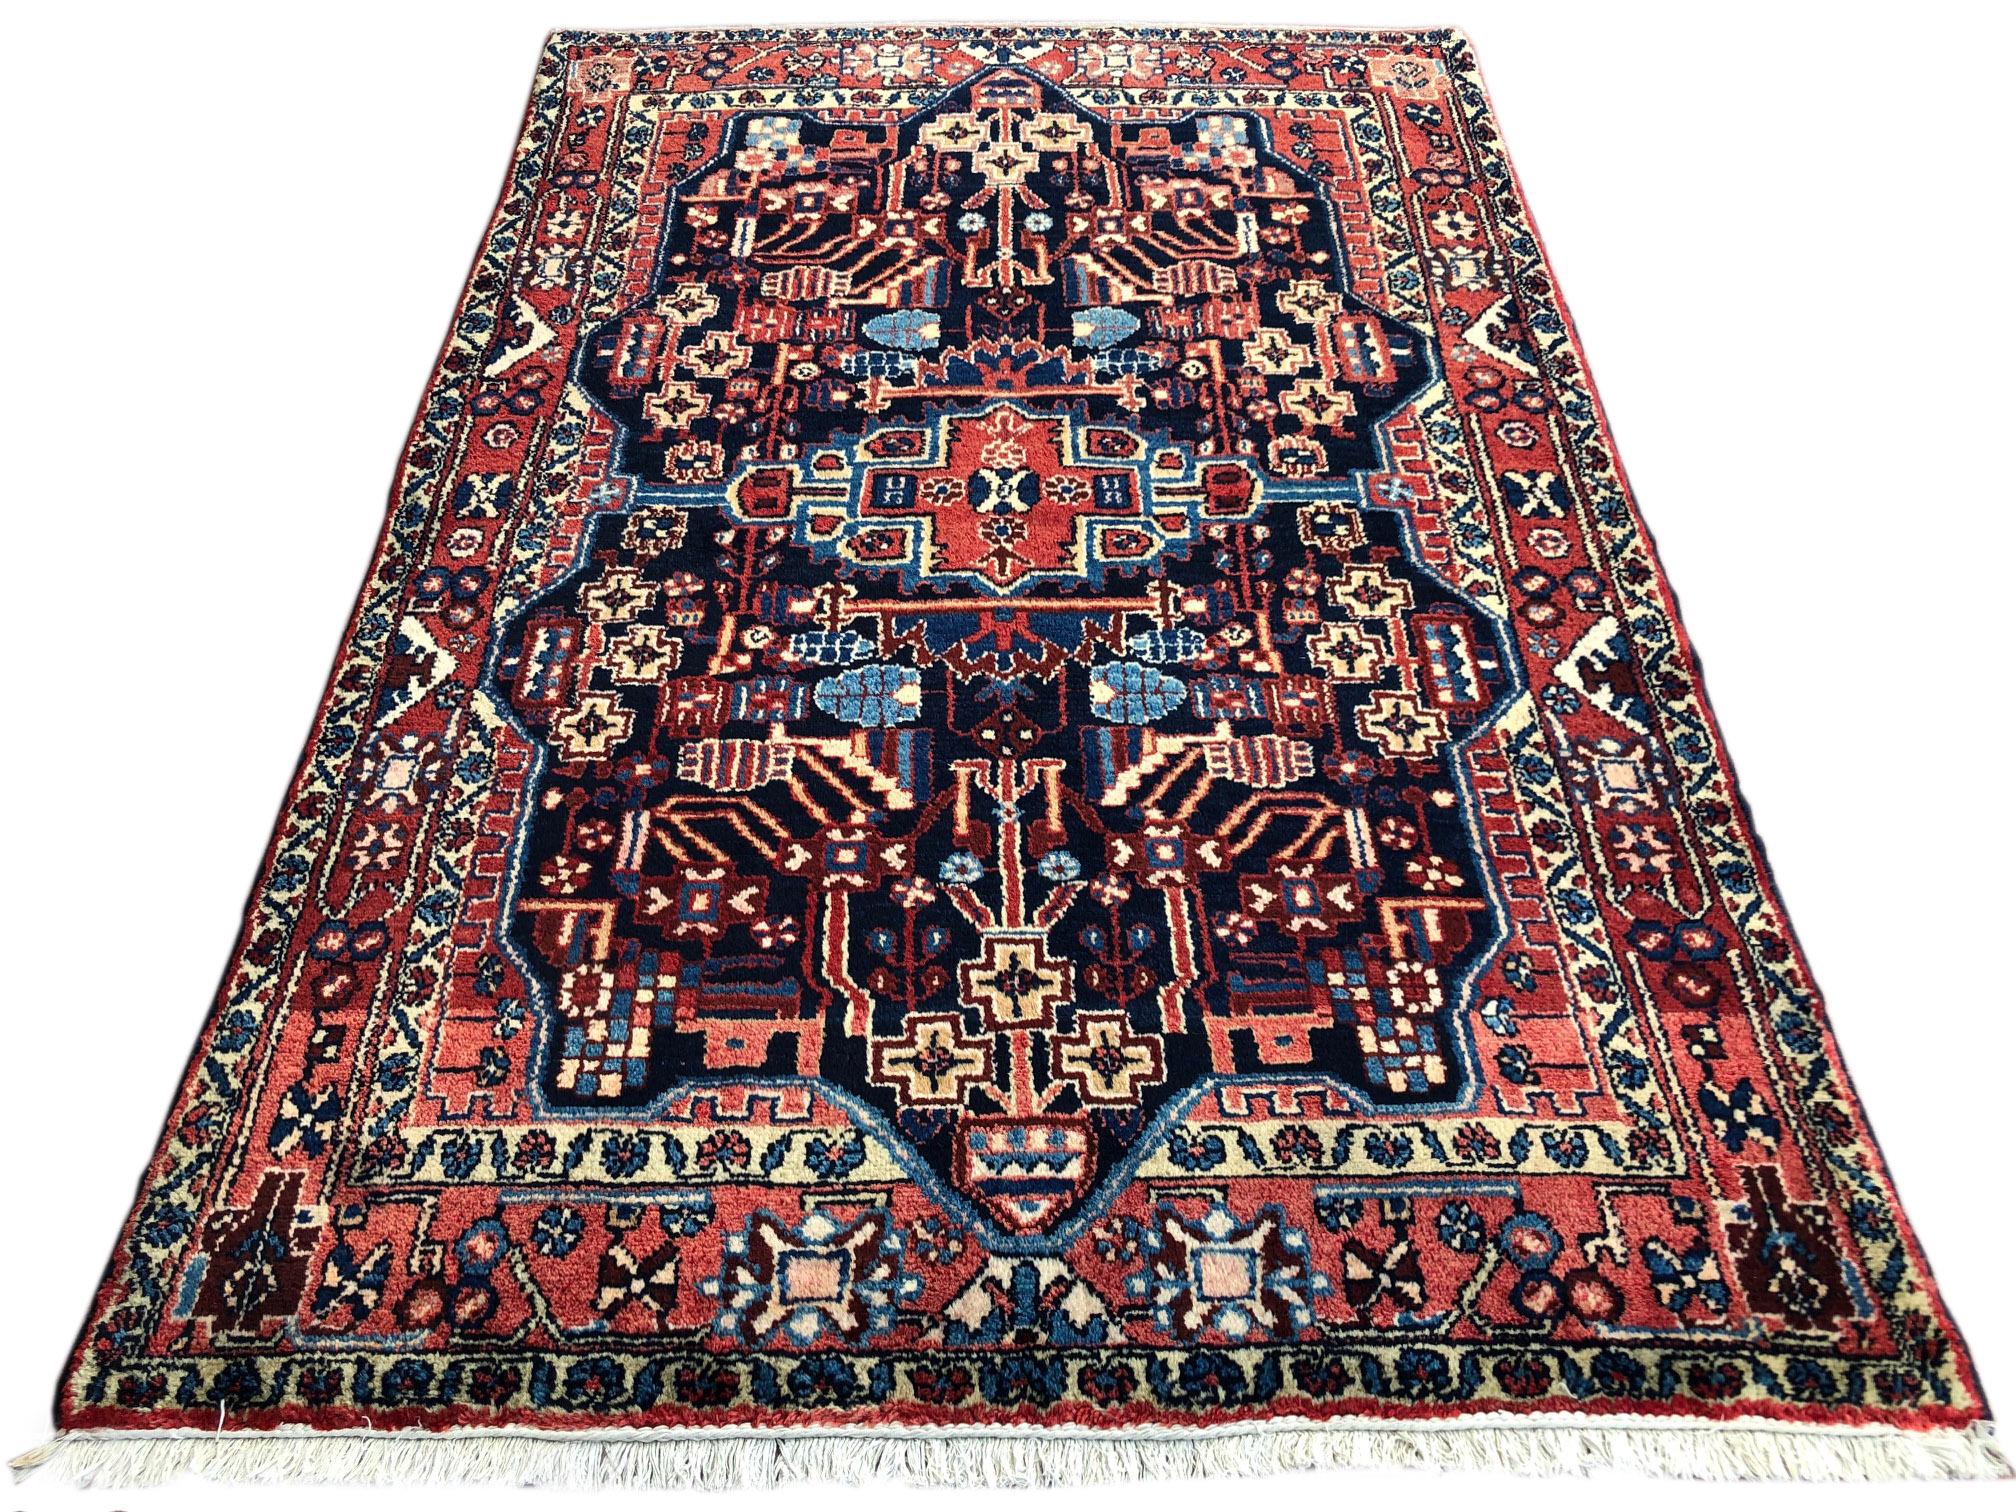 Hamadan is one of the largest weaving areas in the region and encompasses hundreds of villages. Each one of these villages has its own characteristic weaving tradition that dictates the patterns and sizes of the rugs made there. The rugs are mostly